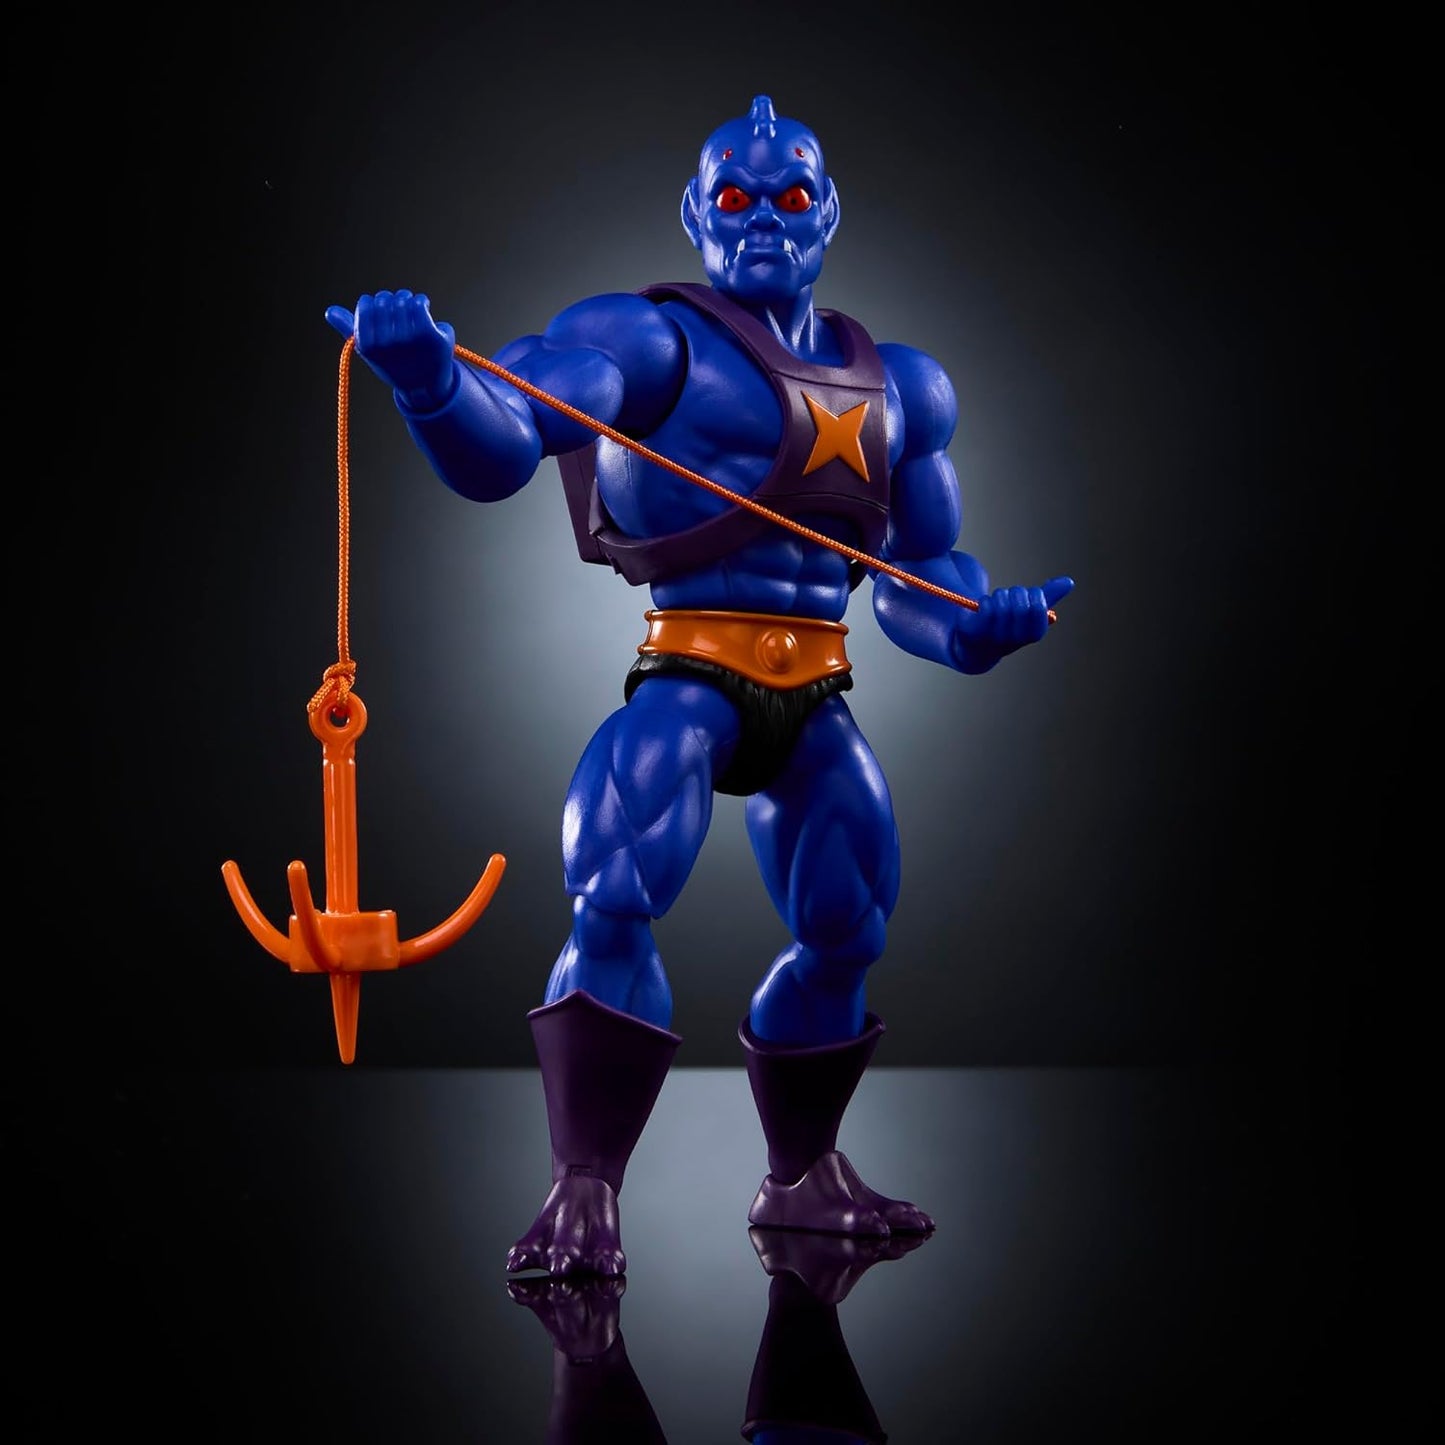 Masters of the Universe Origins Cartoon Collection Webstor